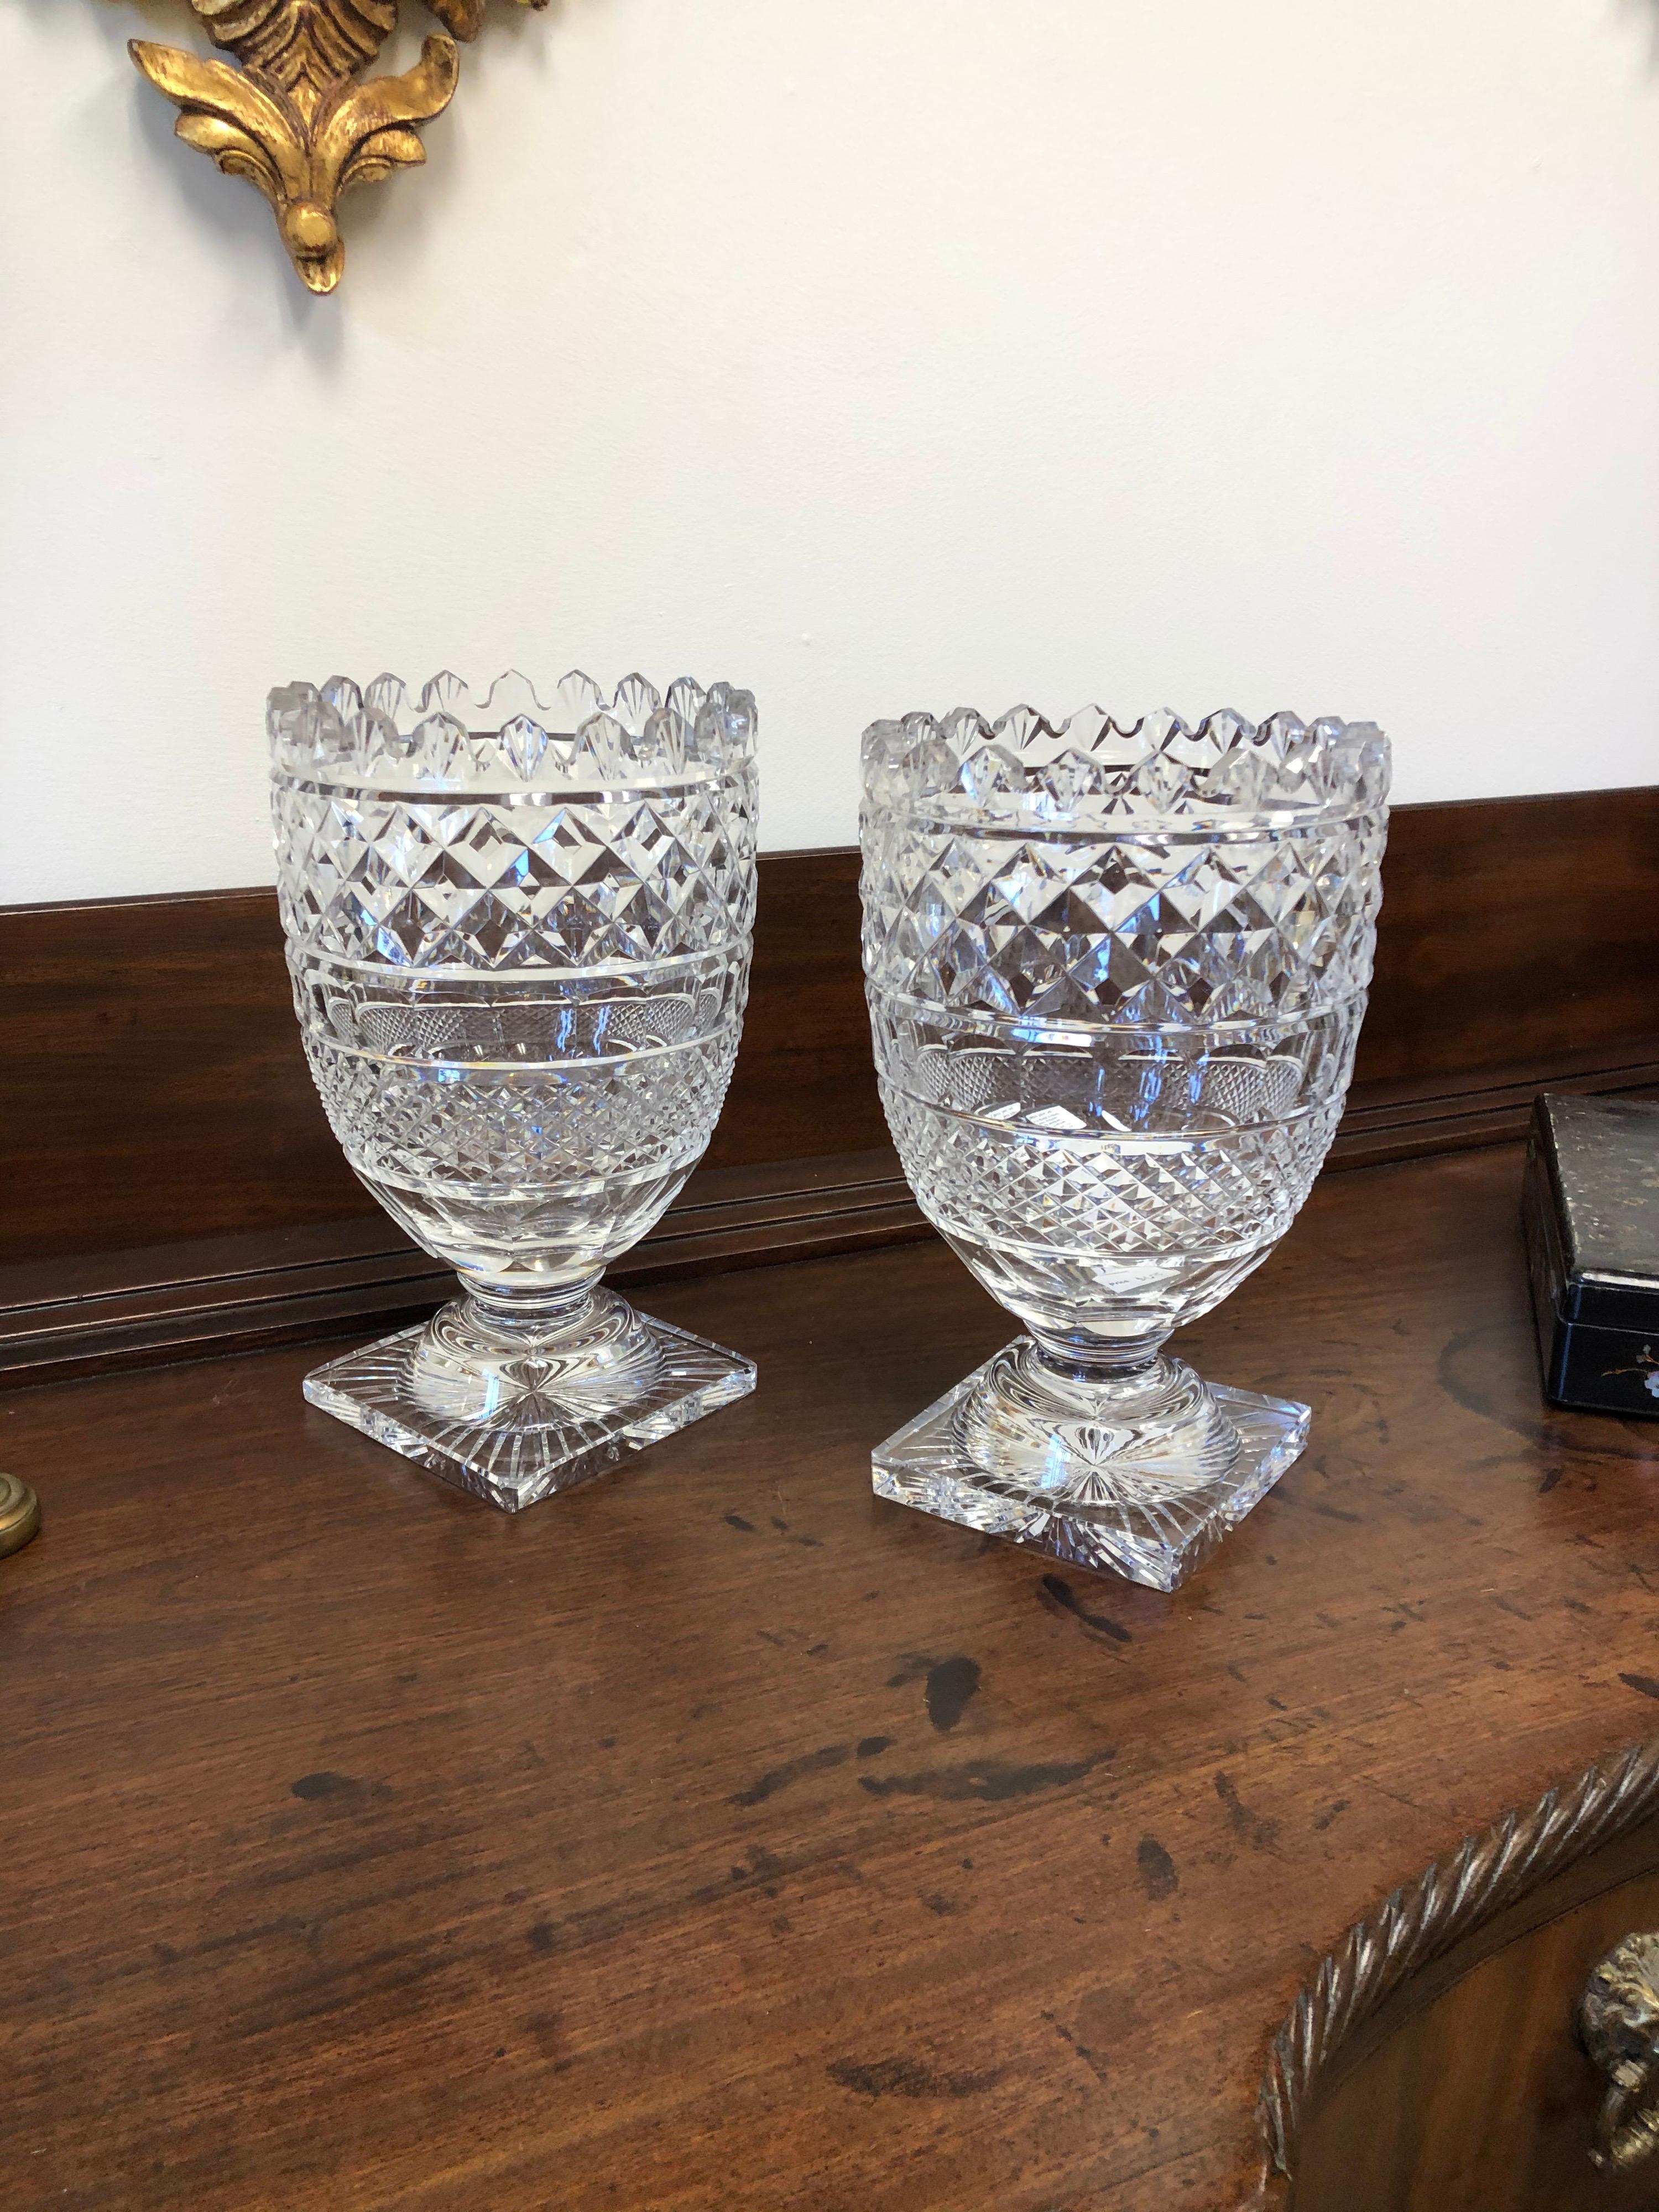 Pair of late 19th or early 20th century cut glass vases.